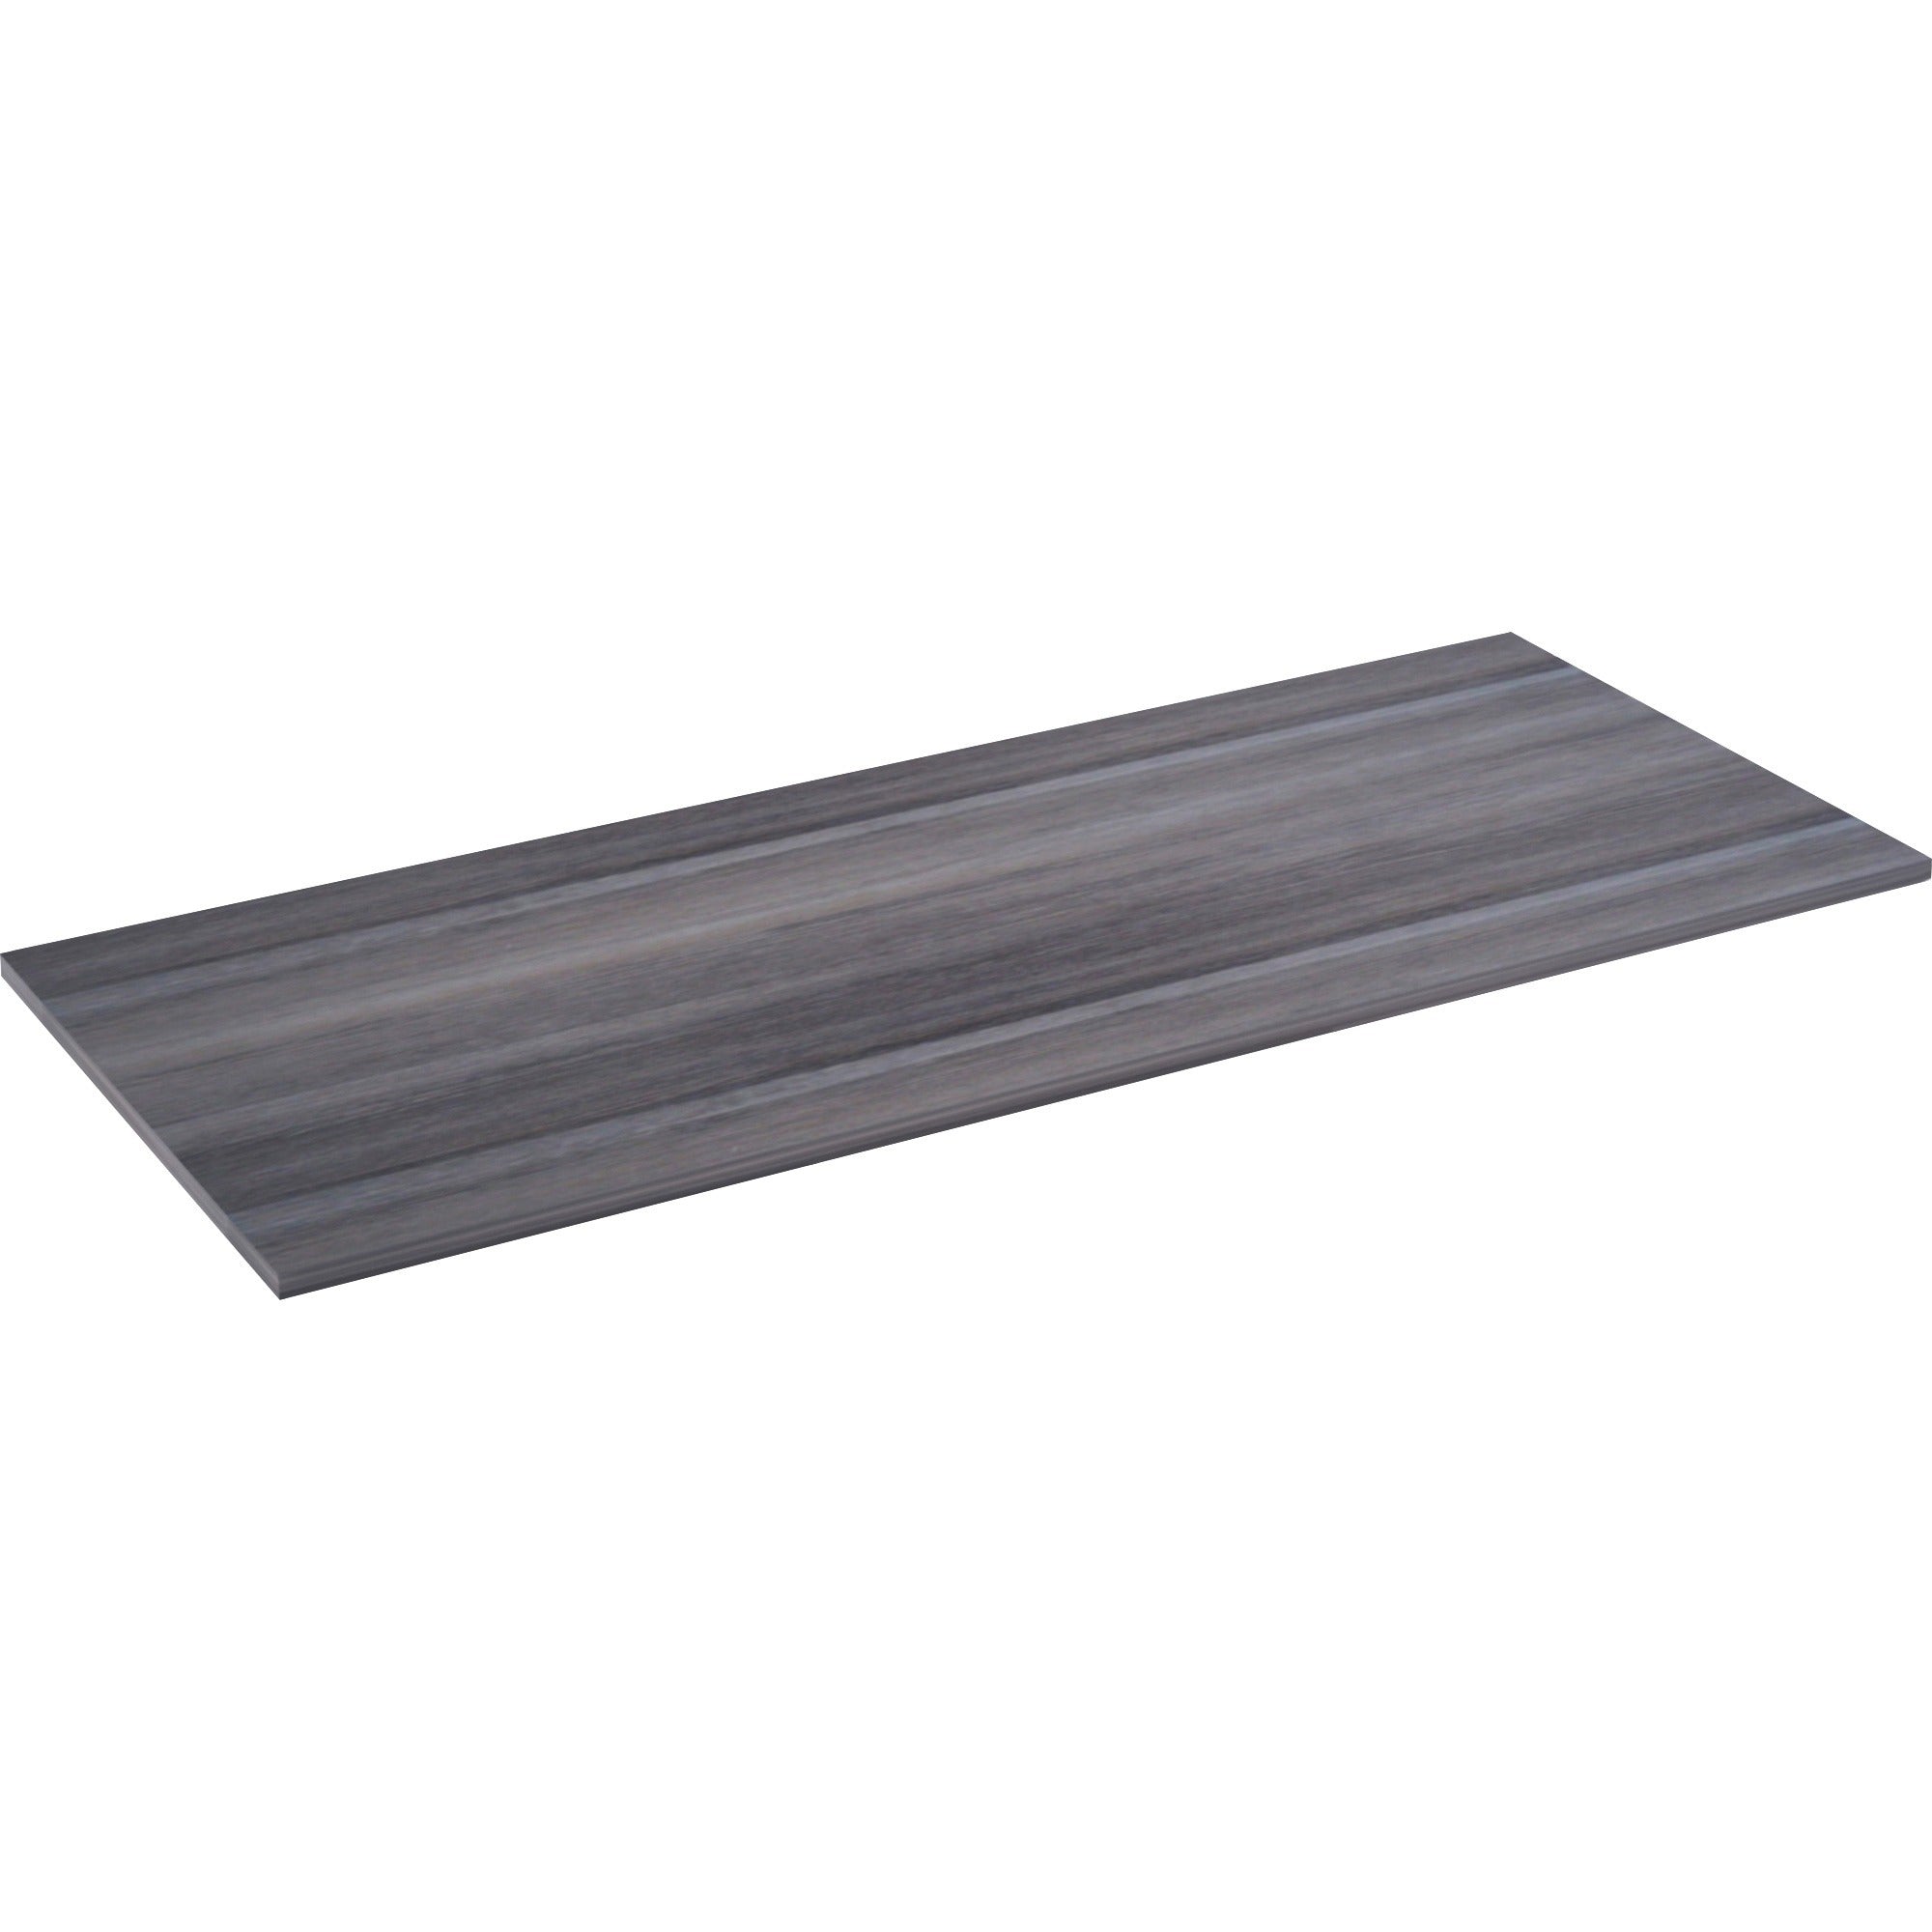 lorell-relevance-series-charcoal-laminate-office-furniture-72-x-30-table-top-straight-edge-material-polyvinyl-chloride-pvc-edge-finish-charcoal-laminate_llr16198 - 1